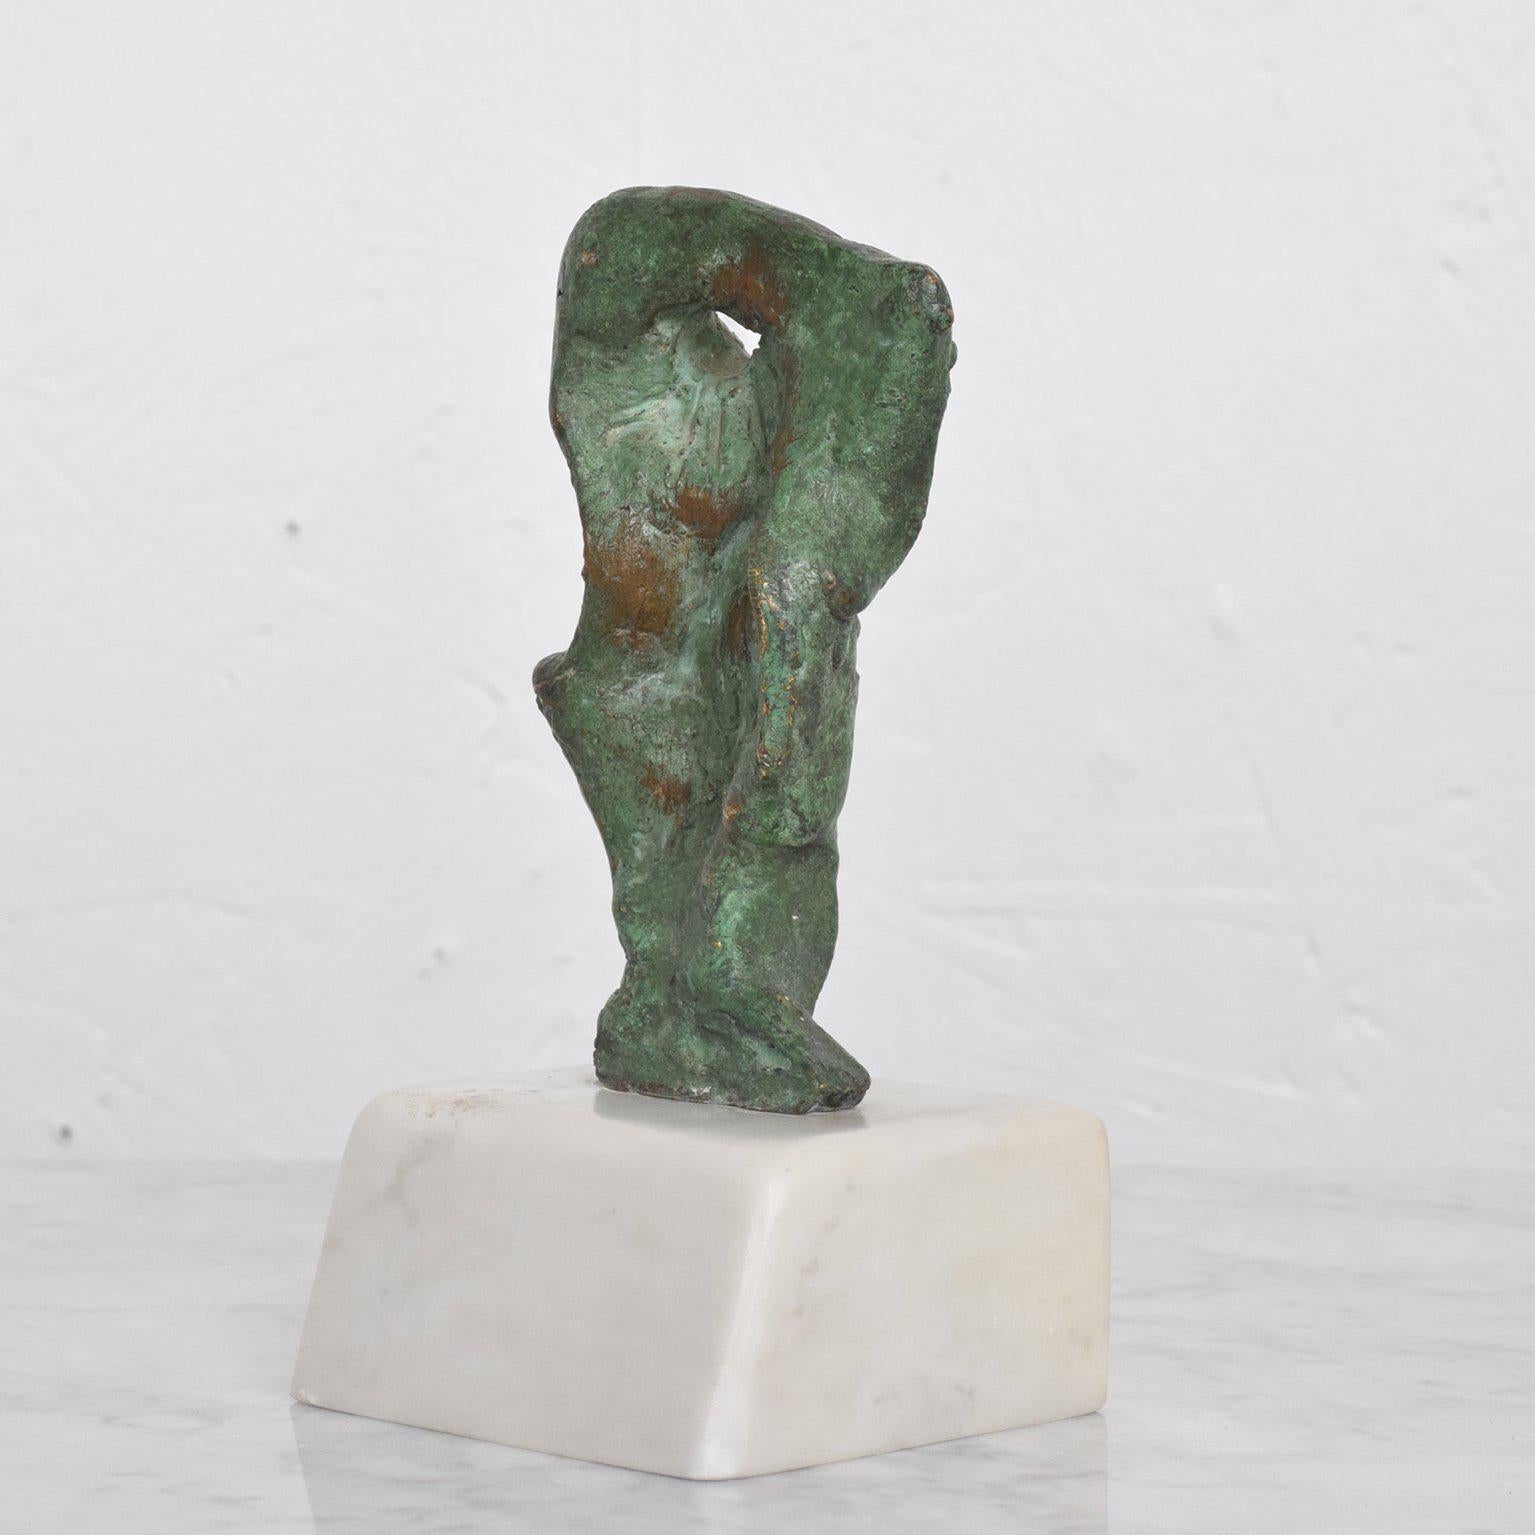 For your consideration a vintage Mid-Century Modern abstract bronze sculpture by Heriberto Juarez.

Verdi-gris patina in Carrara marble base. 

Signed in the back. No COA available. 

Measures: 6 1/2